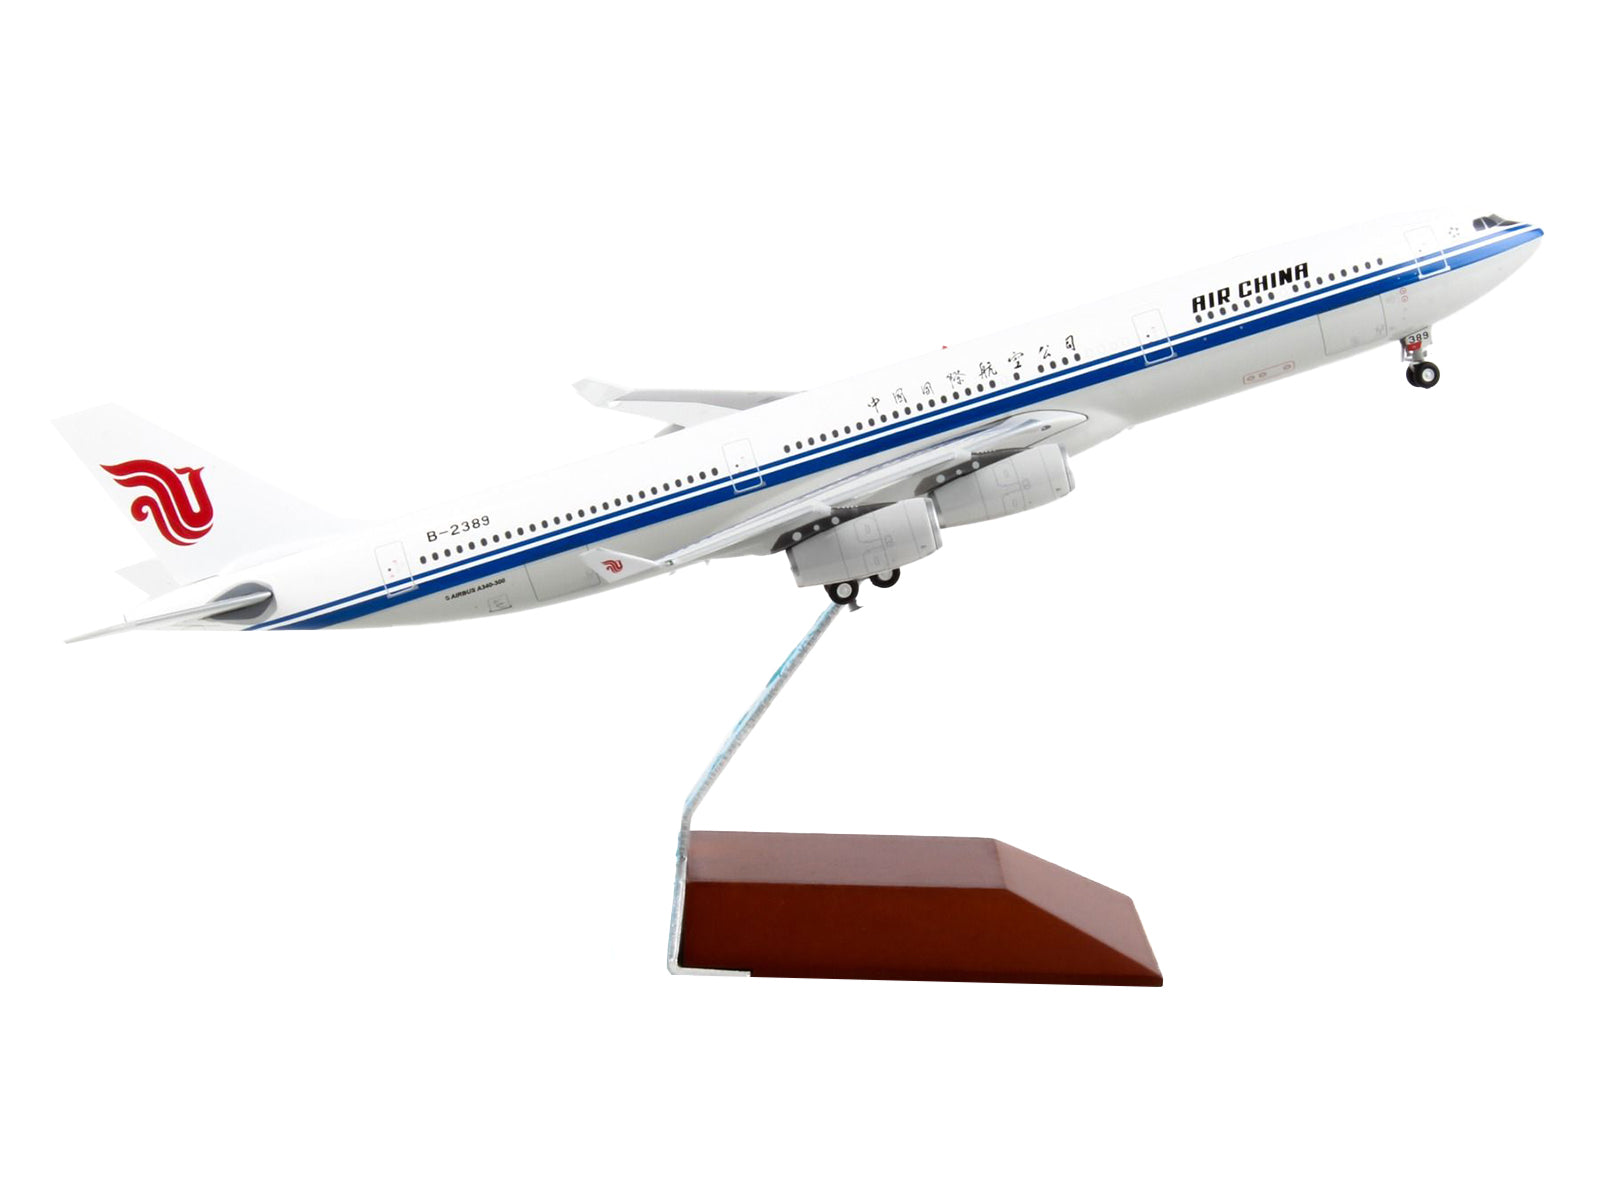 Airbus A340-300 Commercial Aircraft "Air China" White with Blue Stripes "Gemini 200" Series 1/200 Diecast Model Airplane by GeminiJets